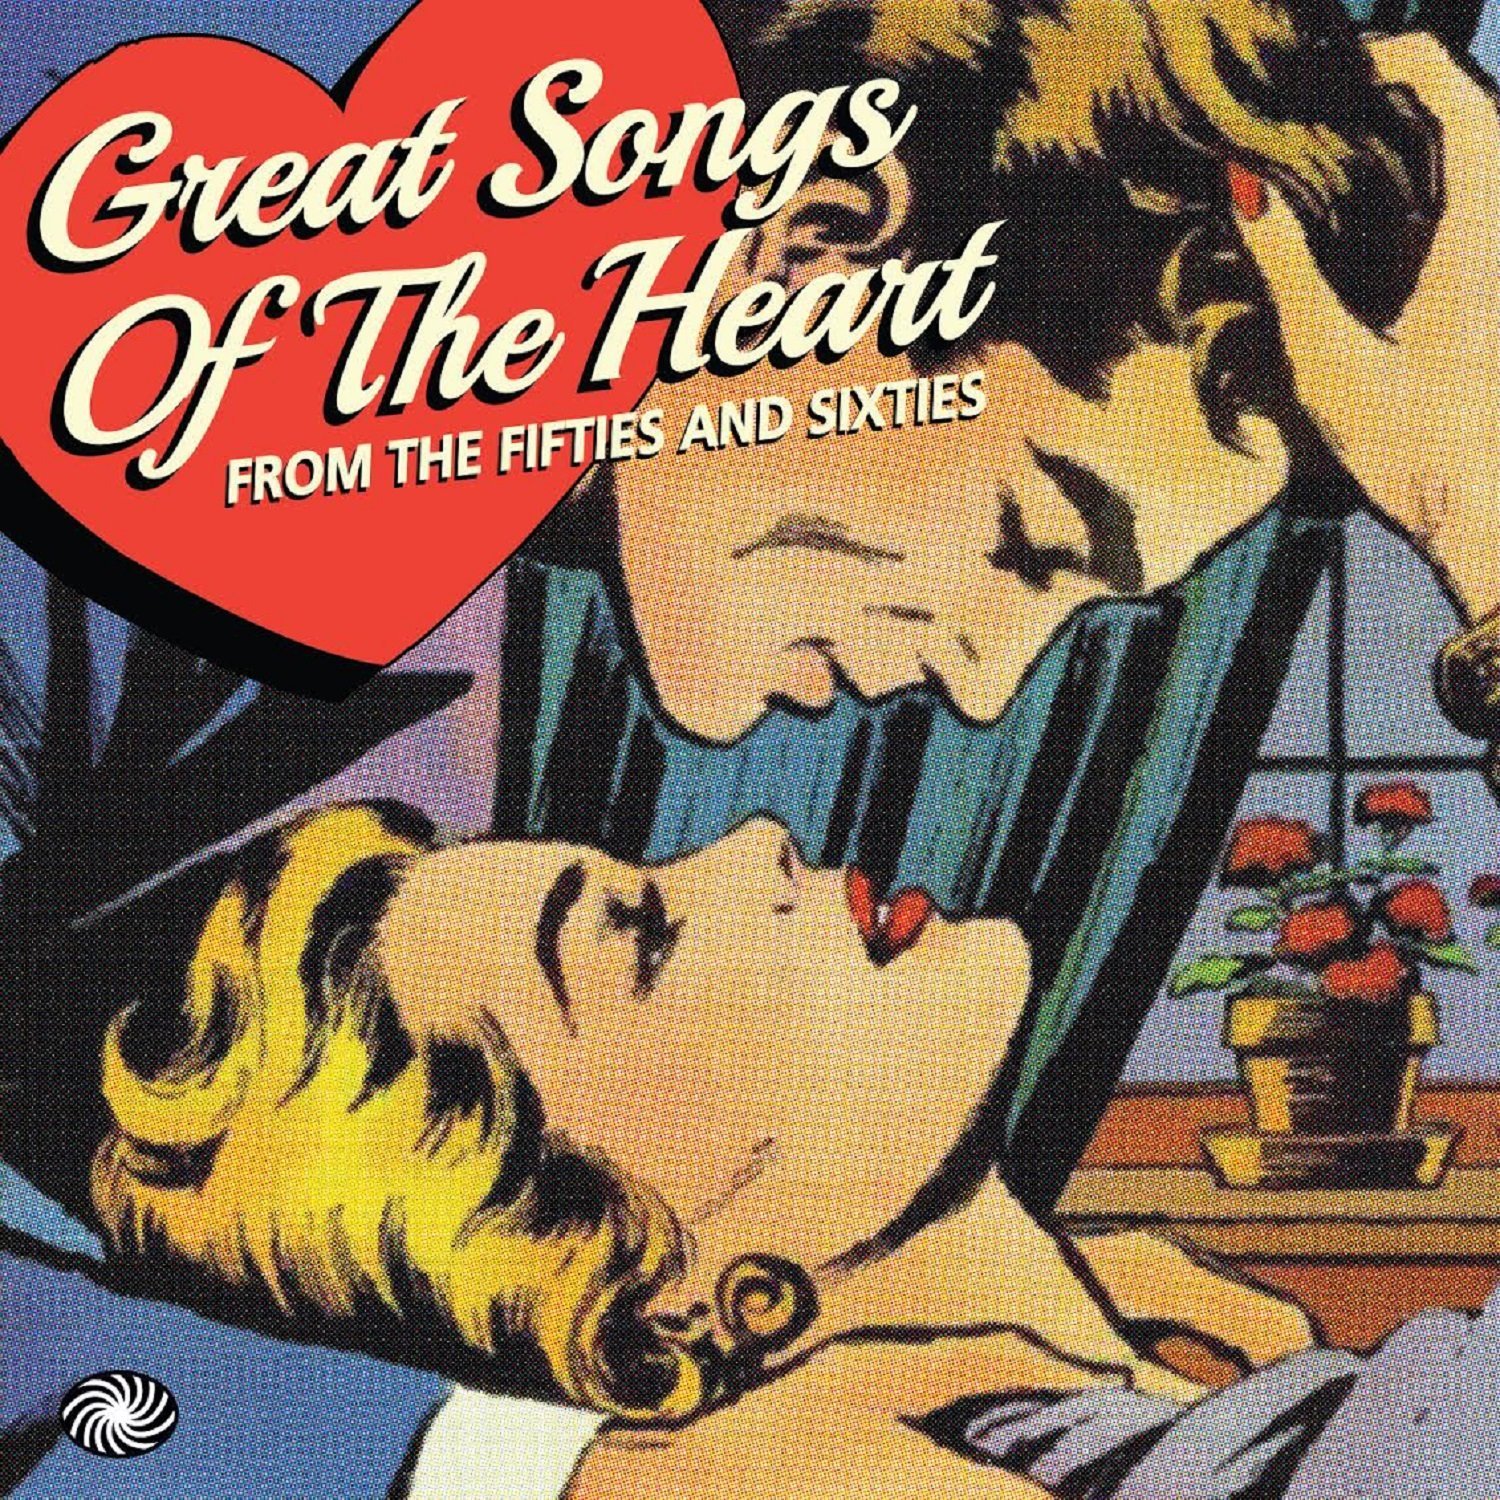 V.A. (OLDIES/50'S-60'S POP) / GREAT SONGS OF THE HEART FROM THE FIFTIES AND SIXTIES (3CD)